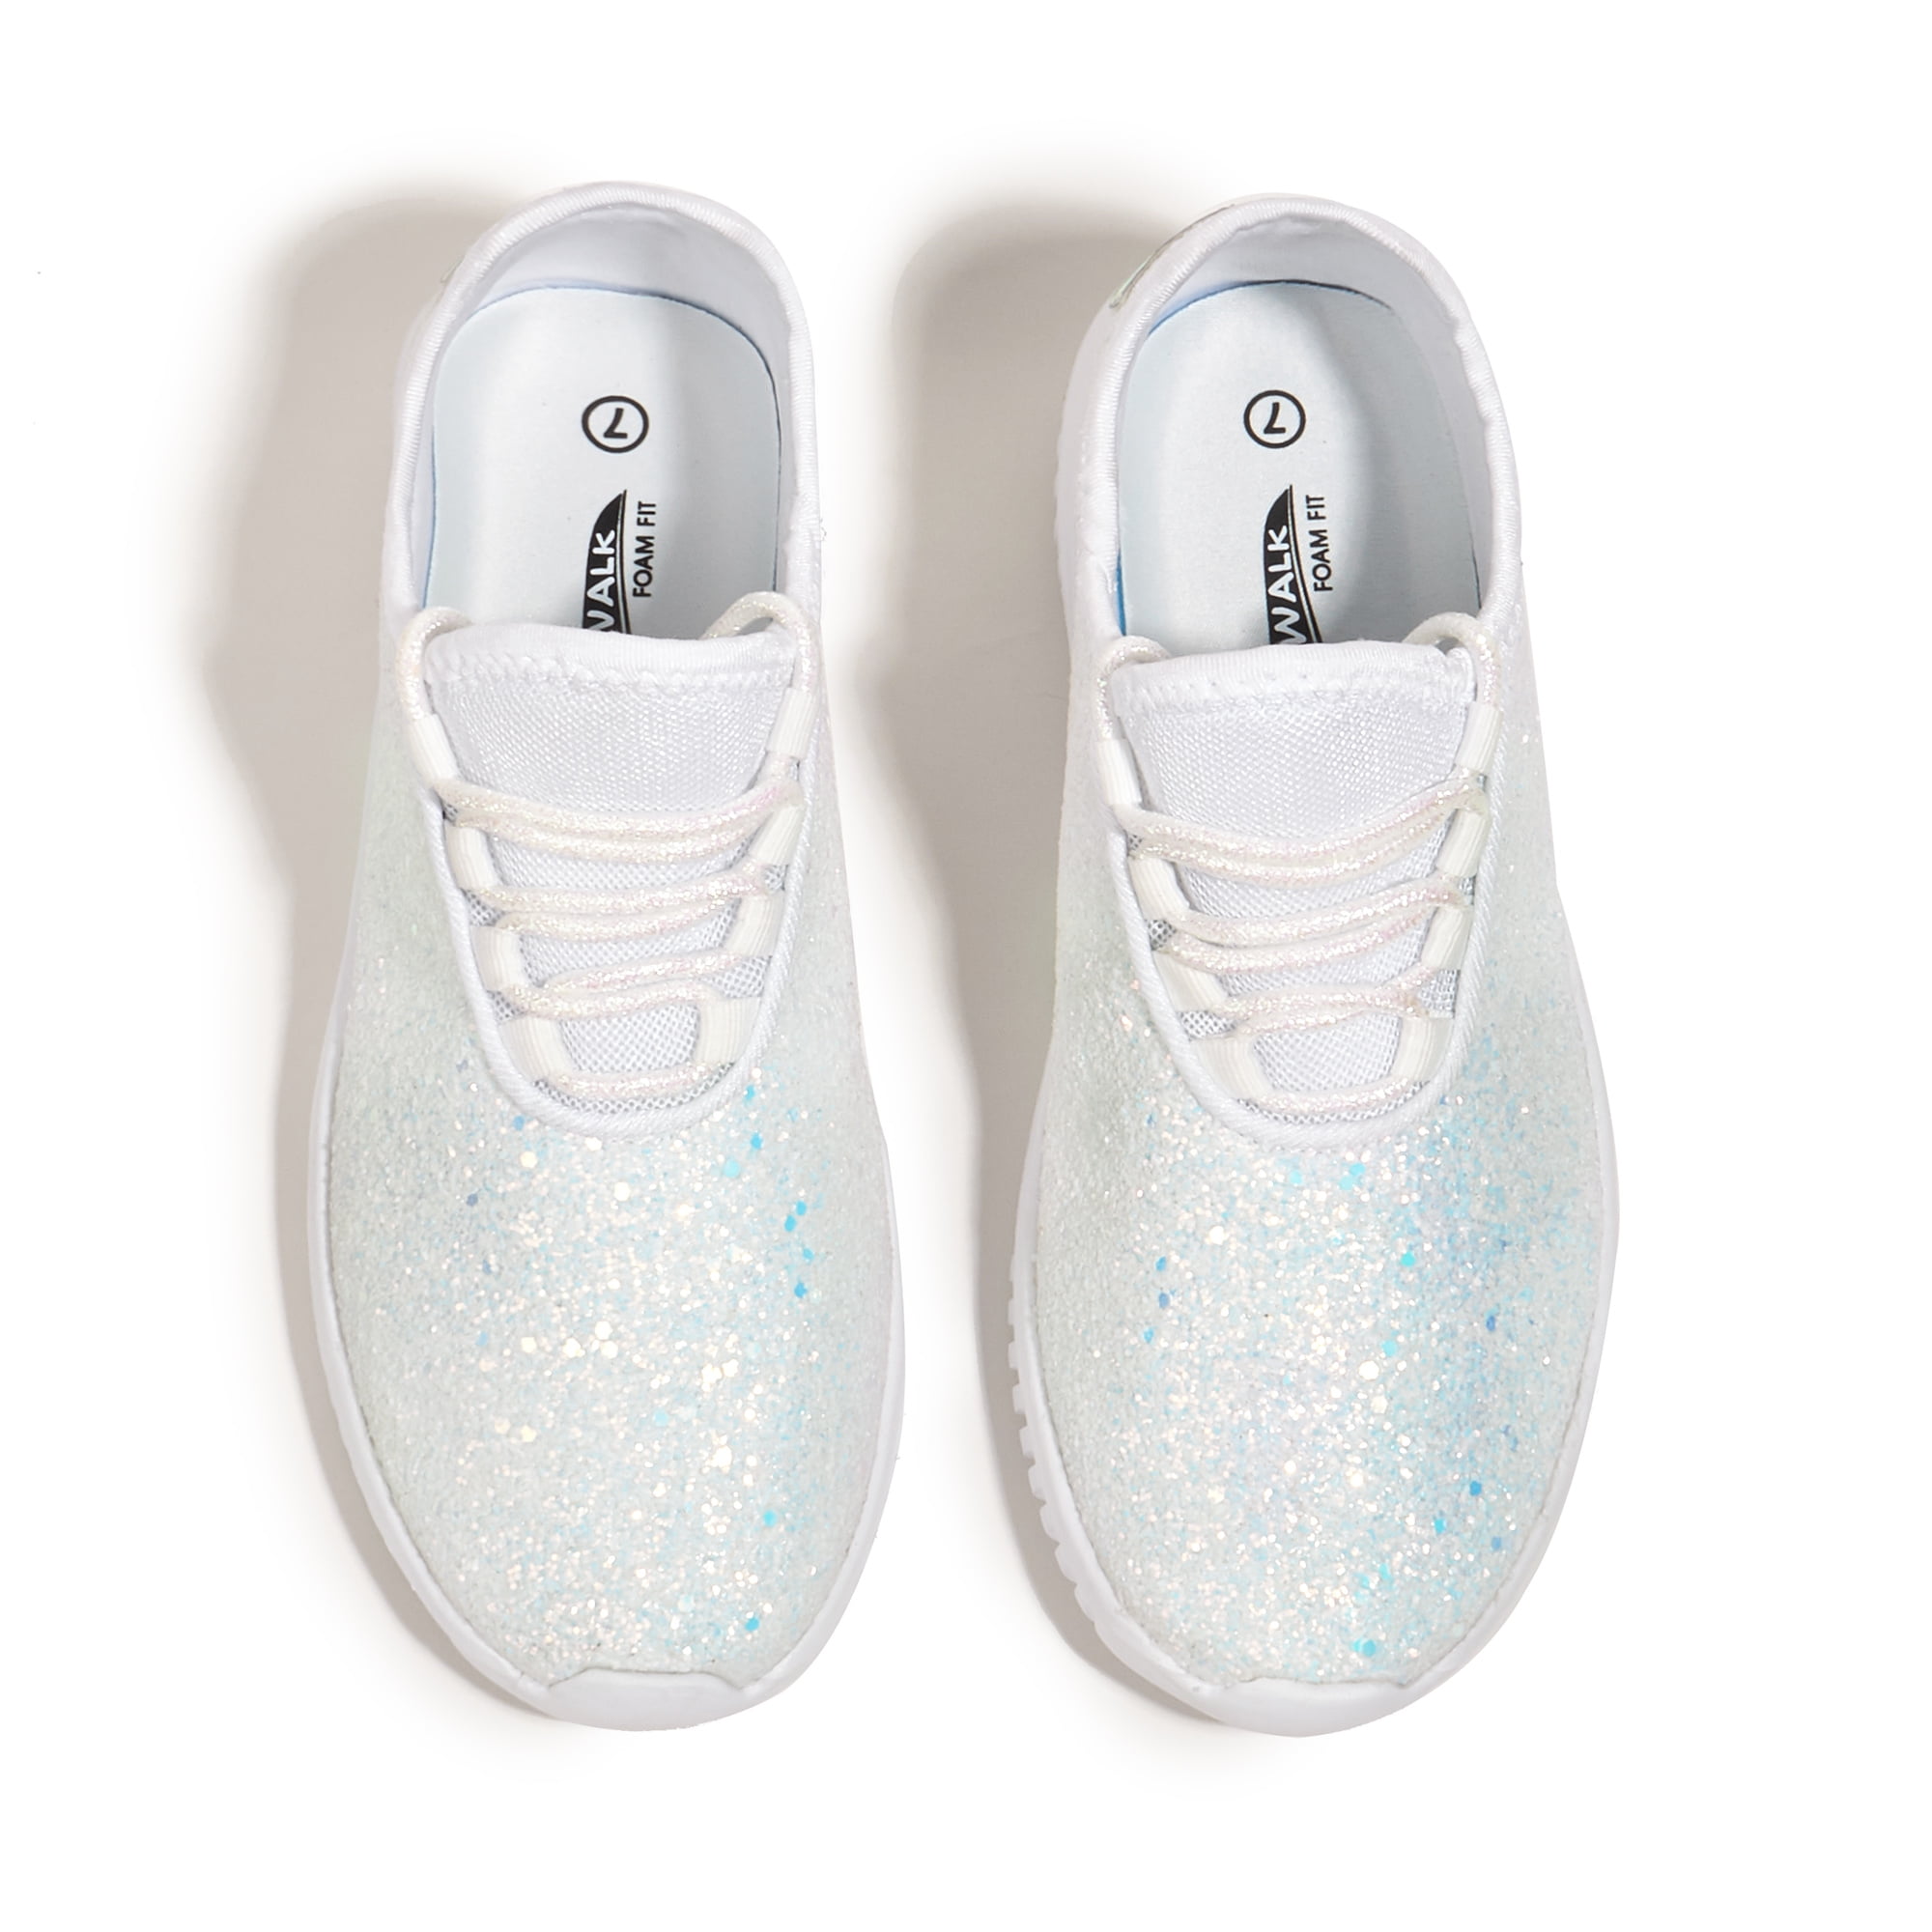 Women's Space-Star shoes in silver glitter with shearling lining | Golden  Goose